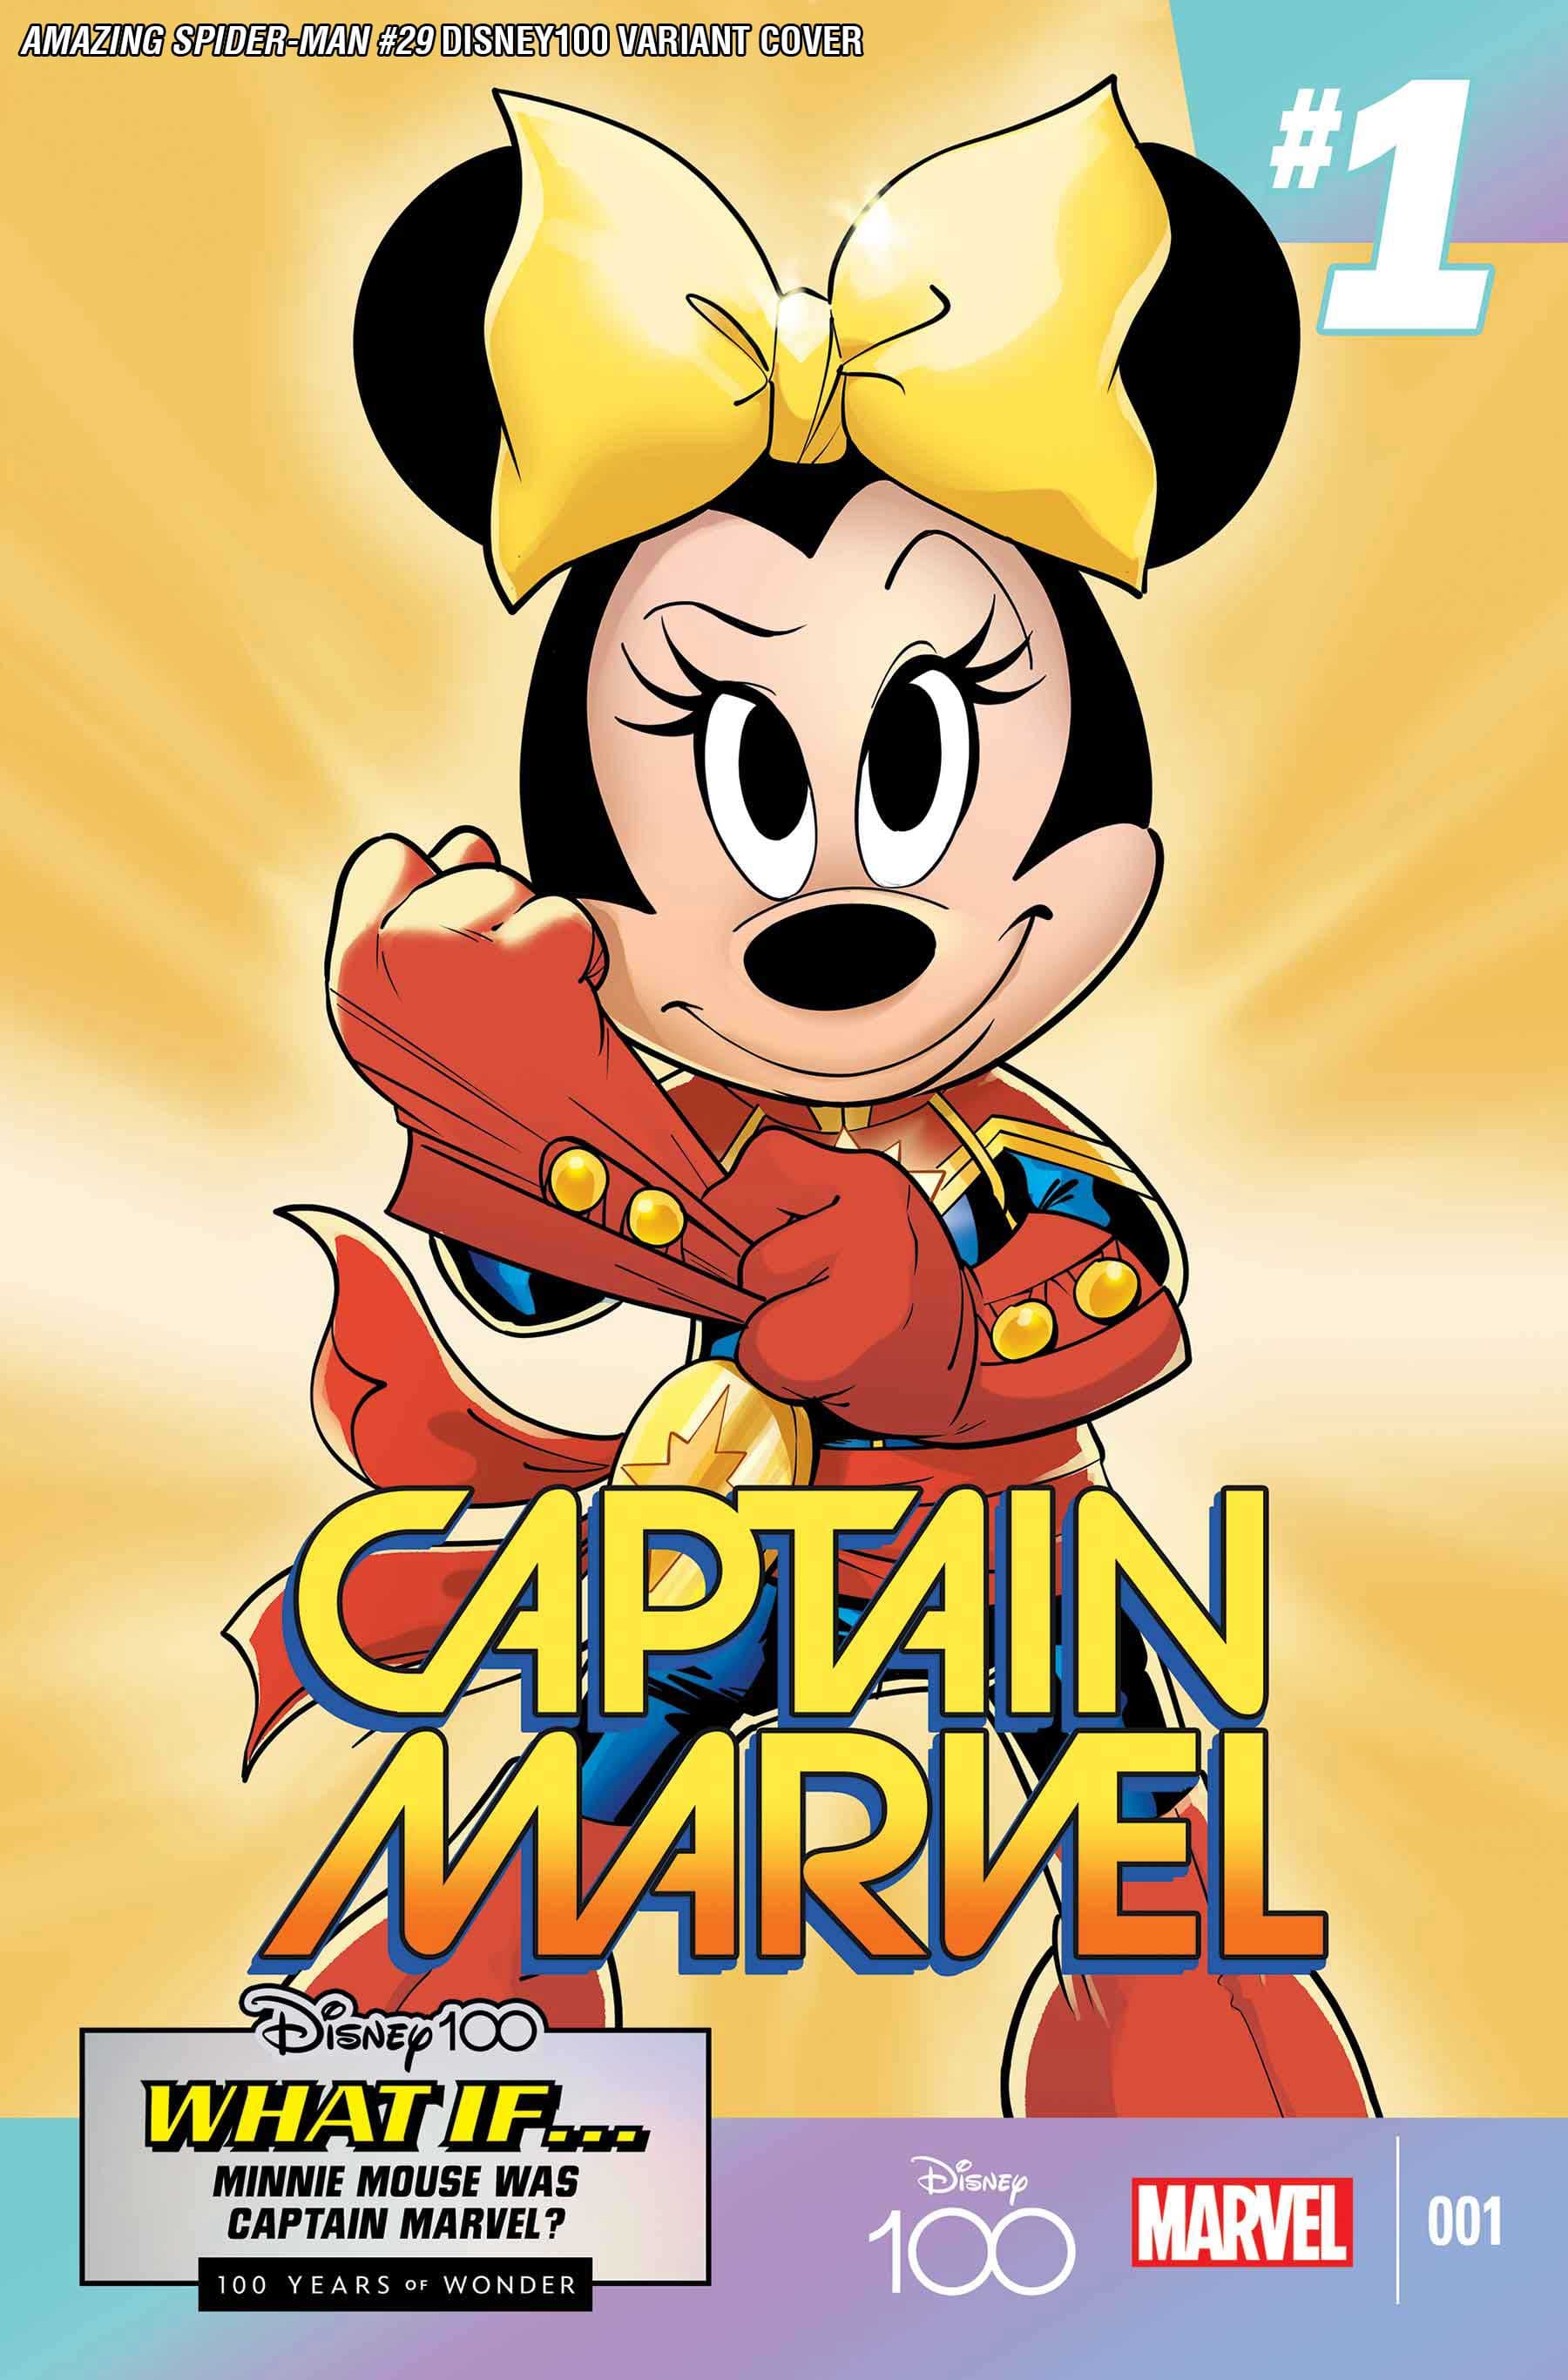 Minnie Mouse and Daisy Duck Homage Marvel's Greatest Heroines as Marvel  Comics Continues to Celebrate 100 Years of Disney